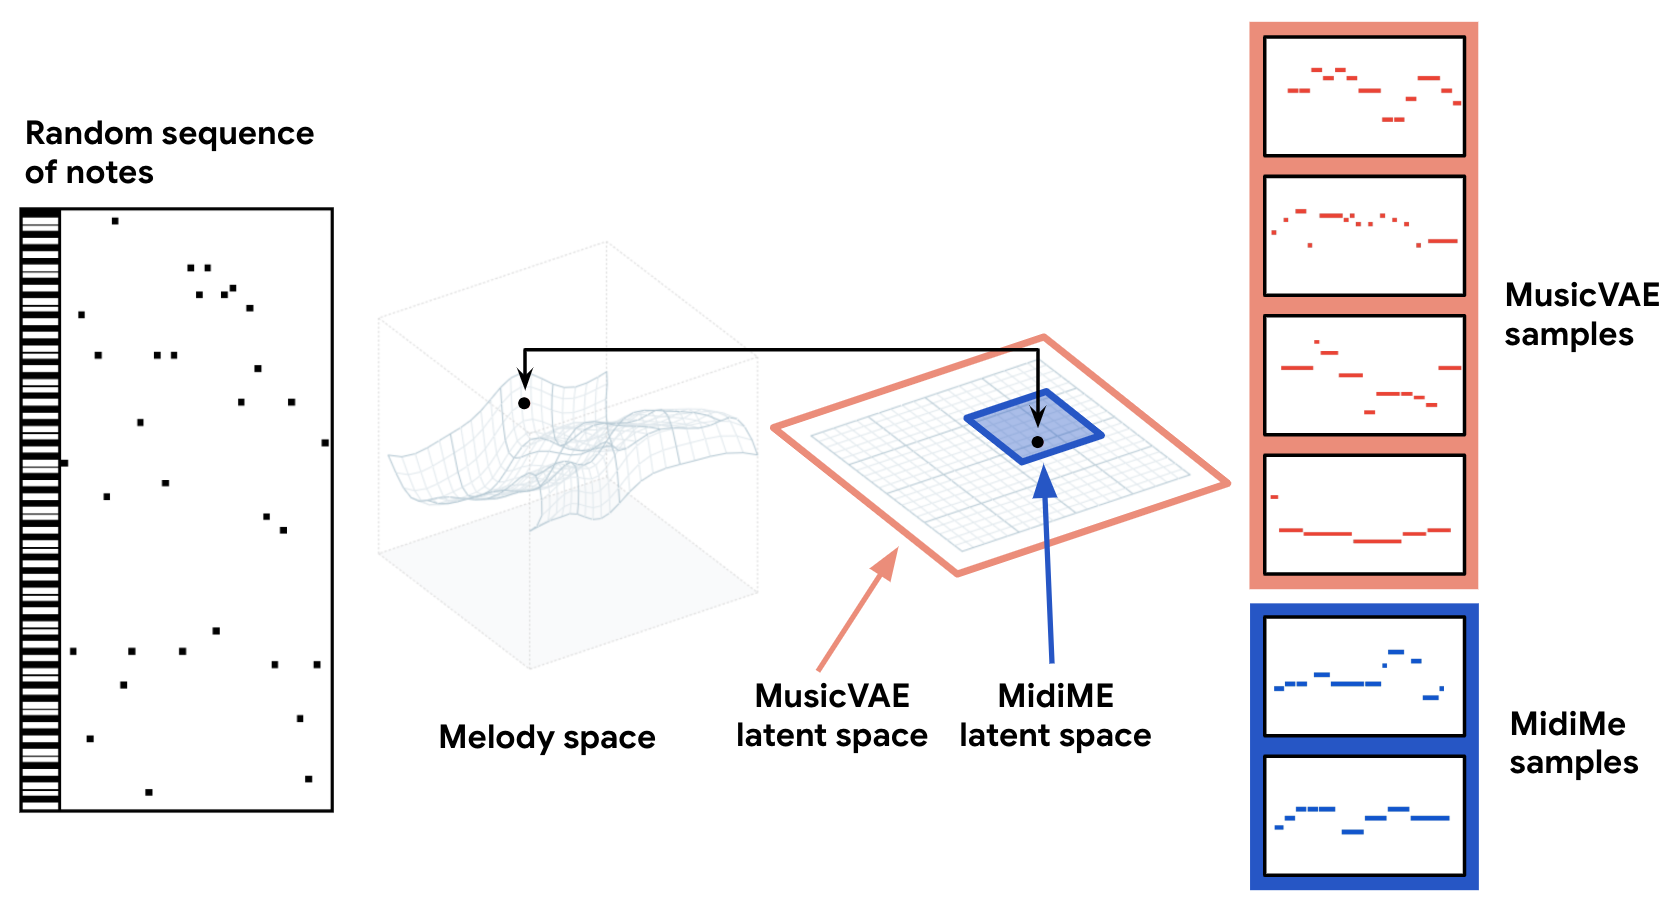 Screenshot of the MidiMe model diagram, showing the relationship between the melody space, and the MusicVAE latent space, and the subset of that latent space that is MidiMe.